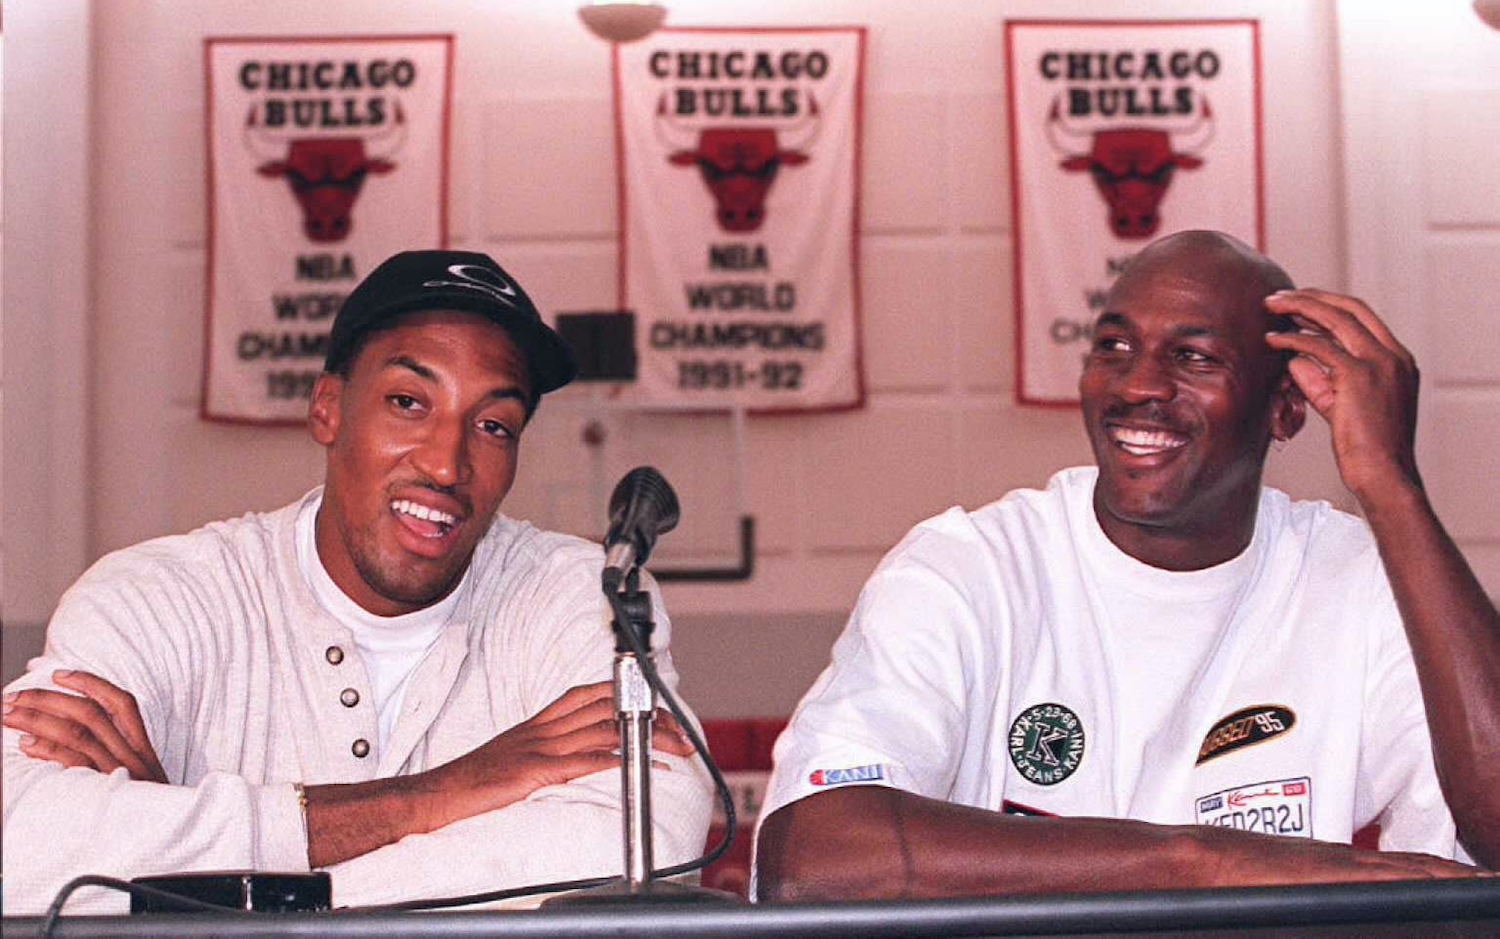 Nautical technical Lock Michael Jordan 'Cheated on a Few of His Bets' but Didn't Intentionally Fix  an Infamous Airport Carousel Wager, According to Scottie Pippen